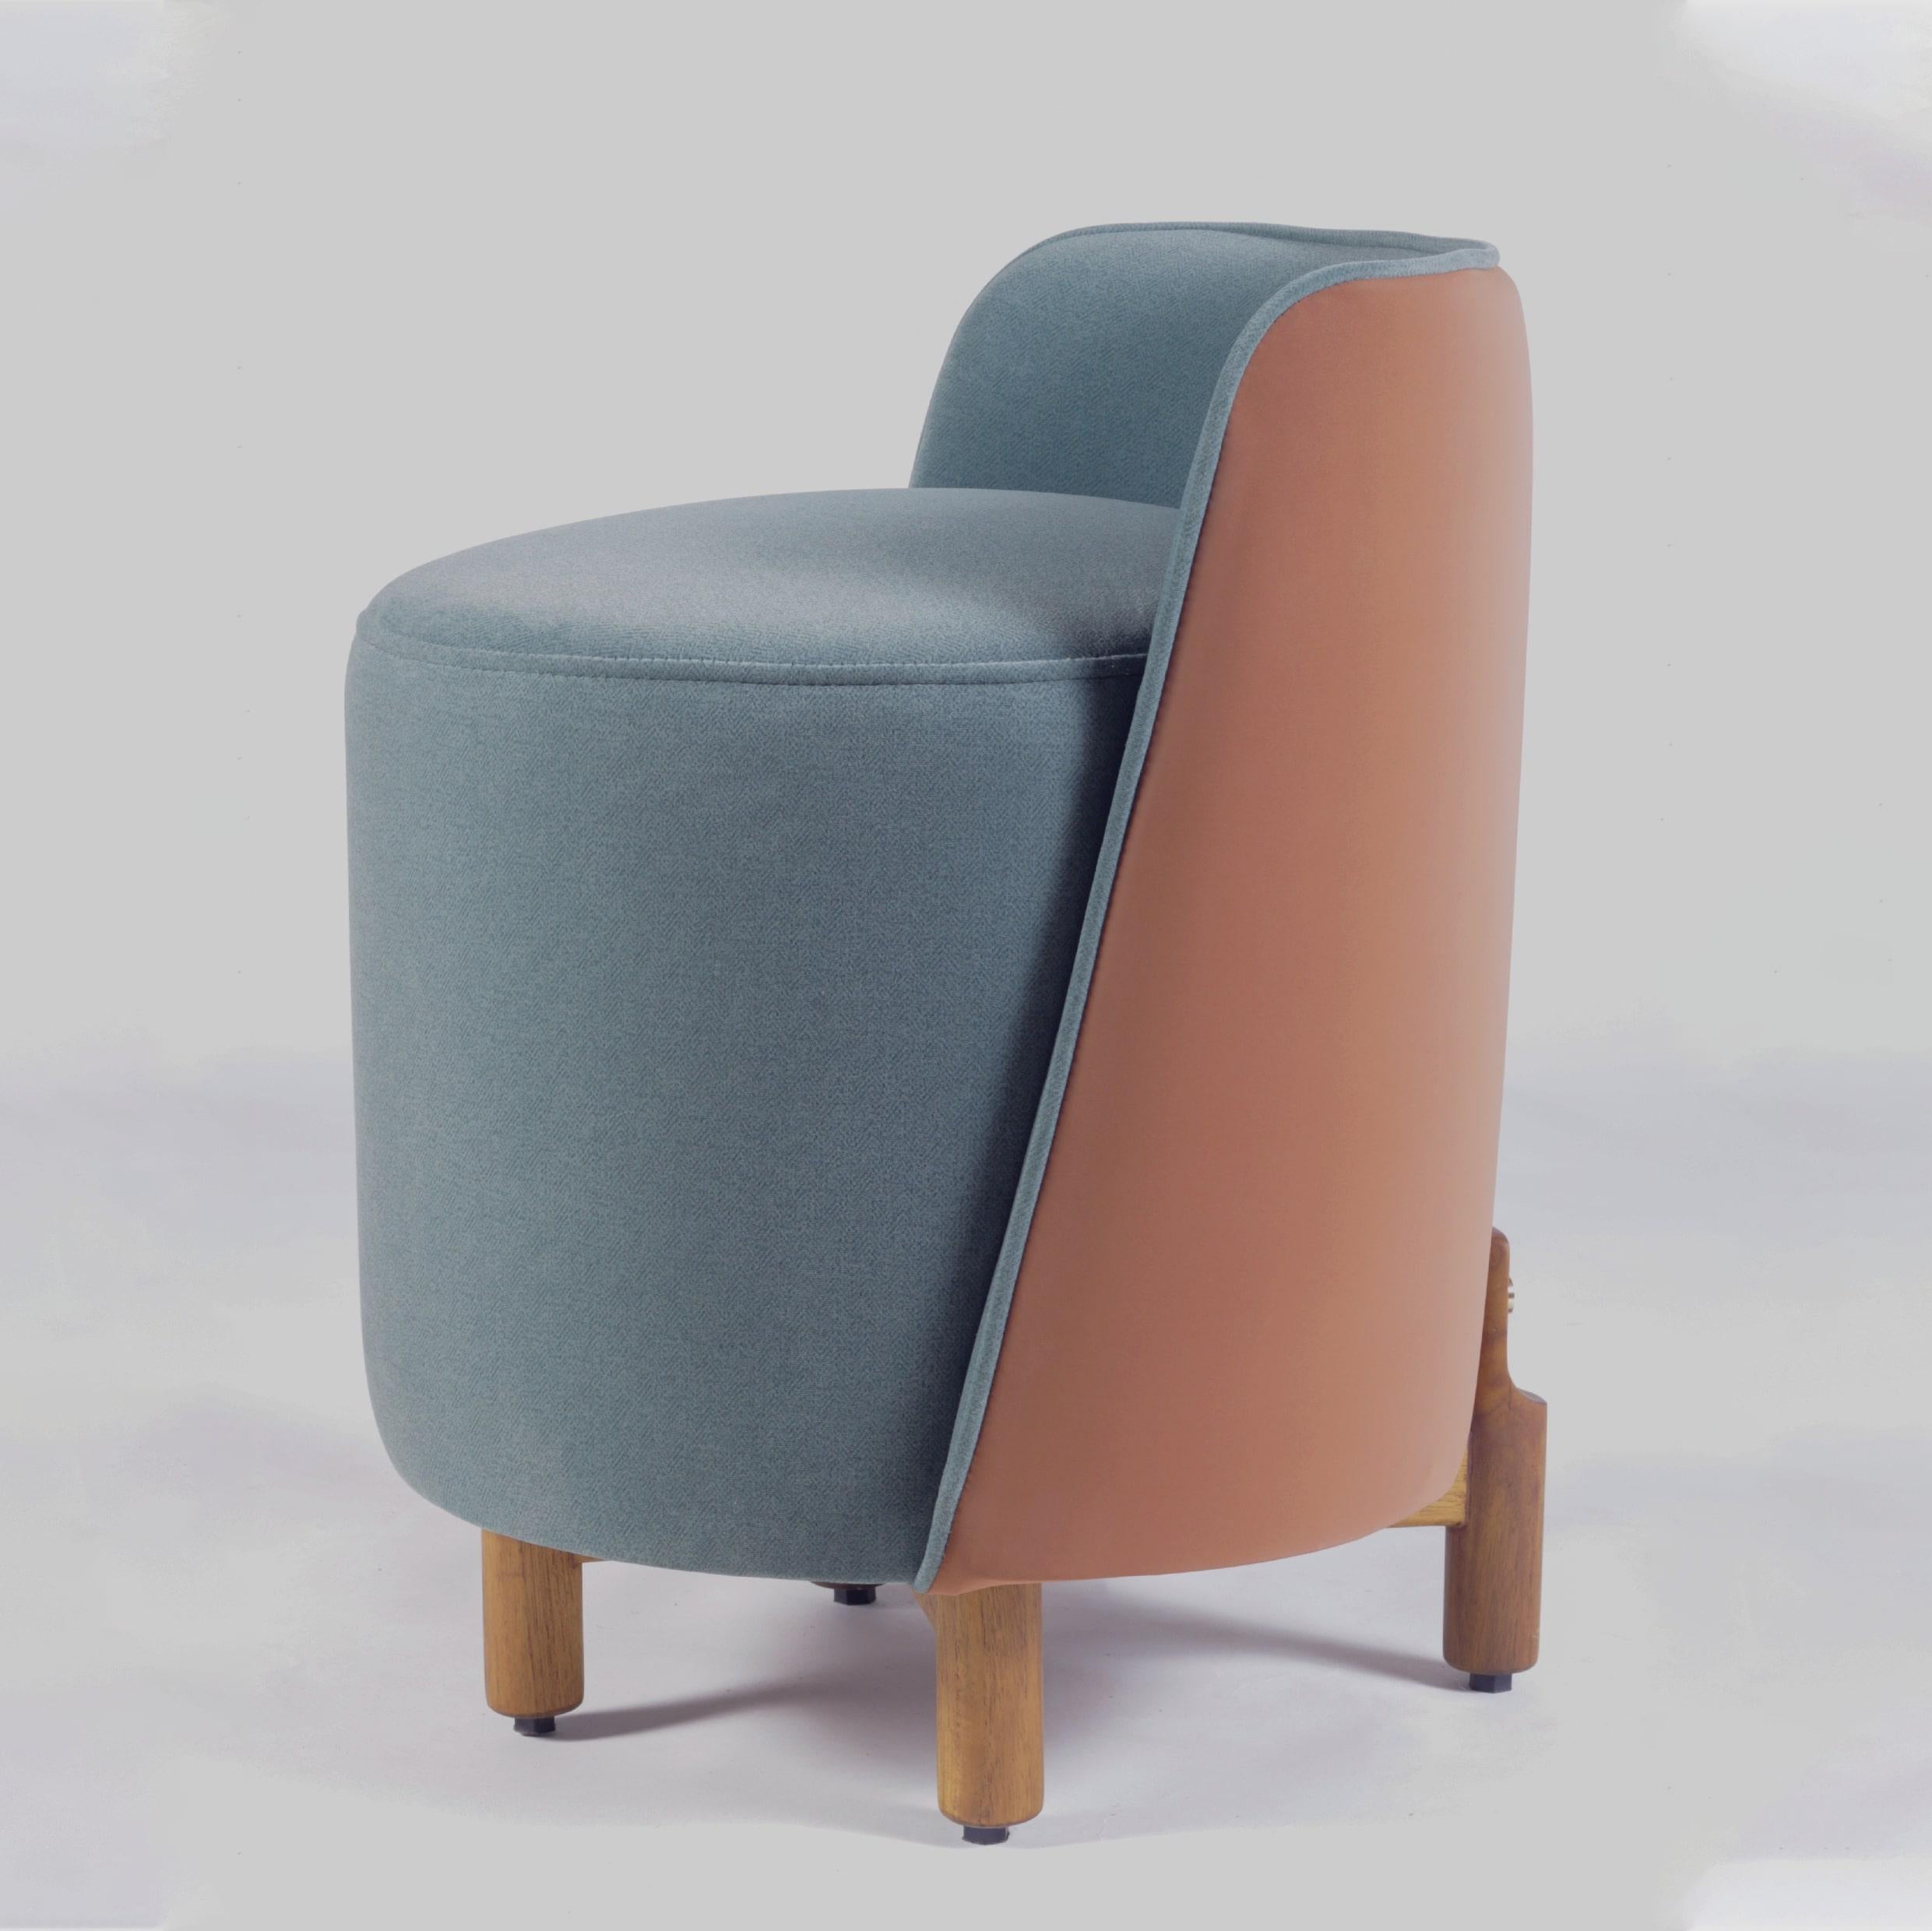 The Minpuff Pouffe is a modern and playful addition to any space. Crafted with solid wood legs, cushioned seat and a backrest, the Minpuff provides a perfect perch for a quick seat or as a footstool. The luscious upholstery creates an interesting